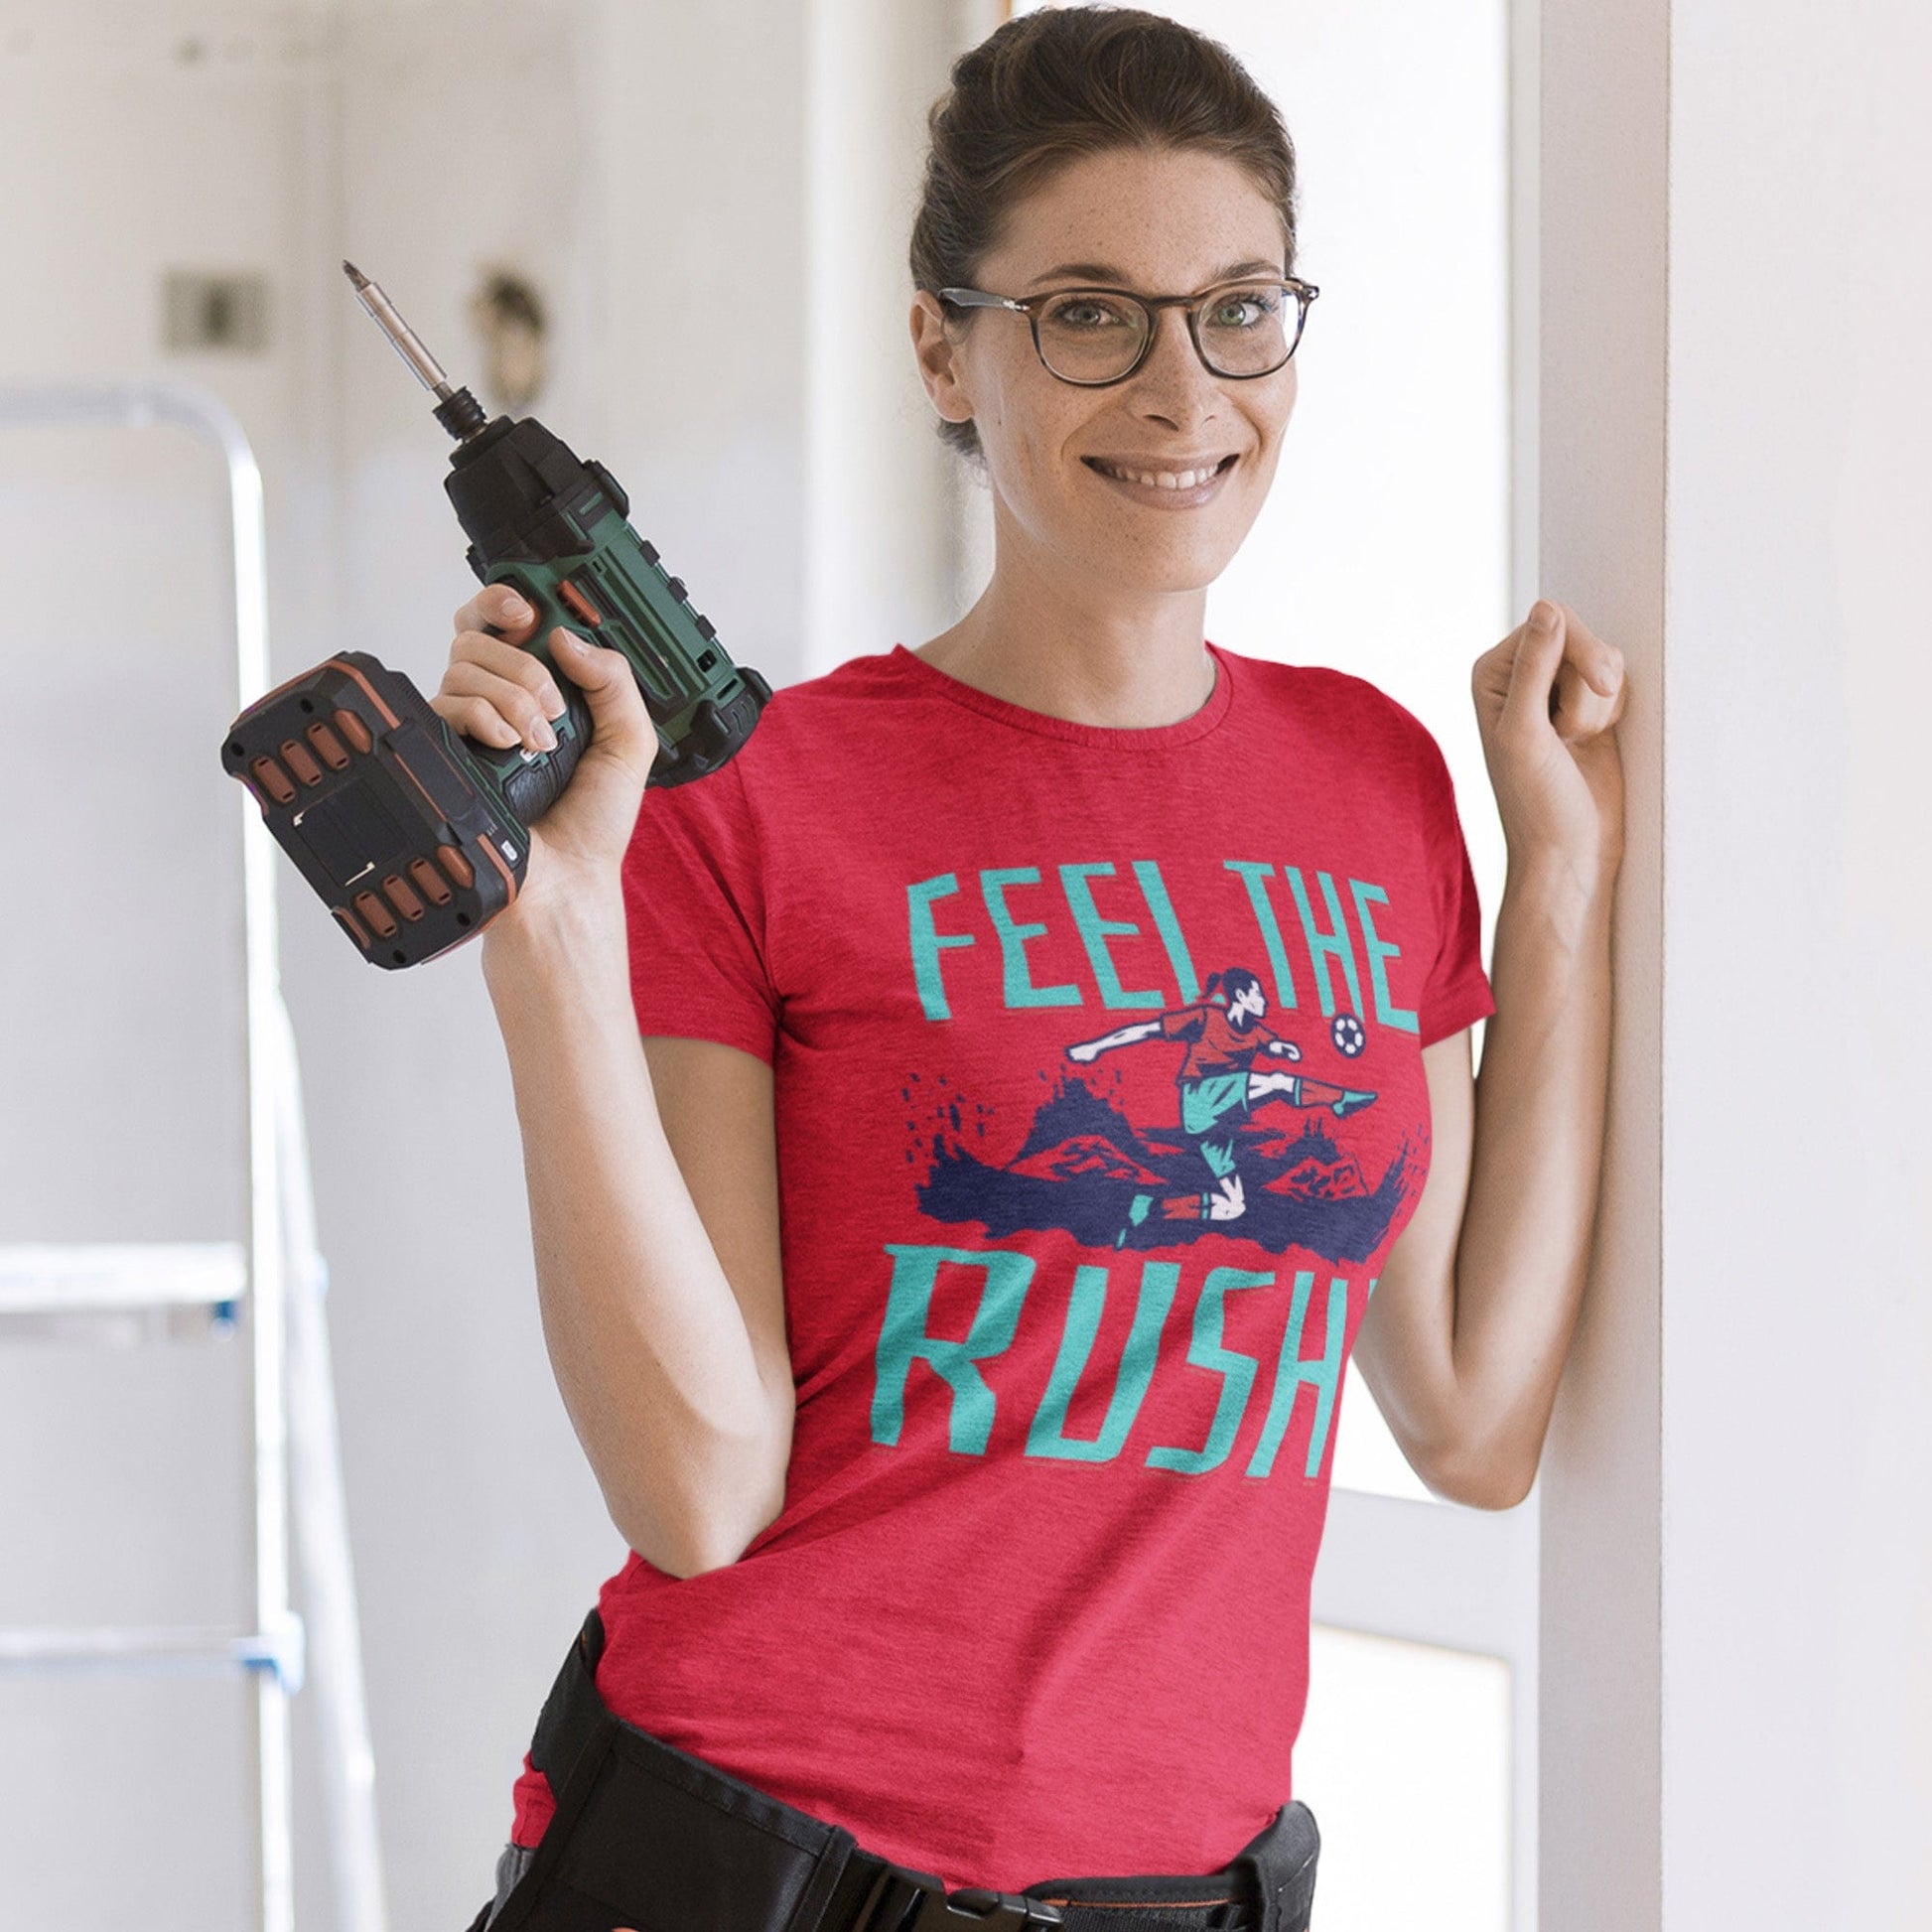 KC Swag Kansas City Current FEEL THE RUSH on heather red unisex t-shirt worn by female model holding a power drill in a remodeling zone